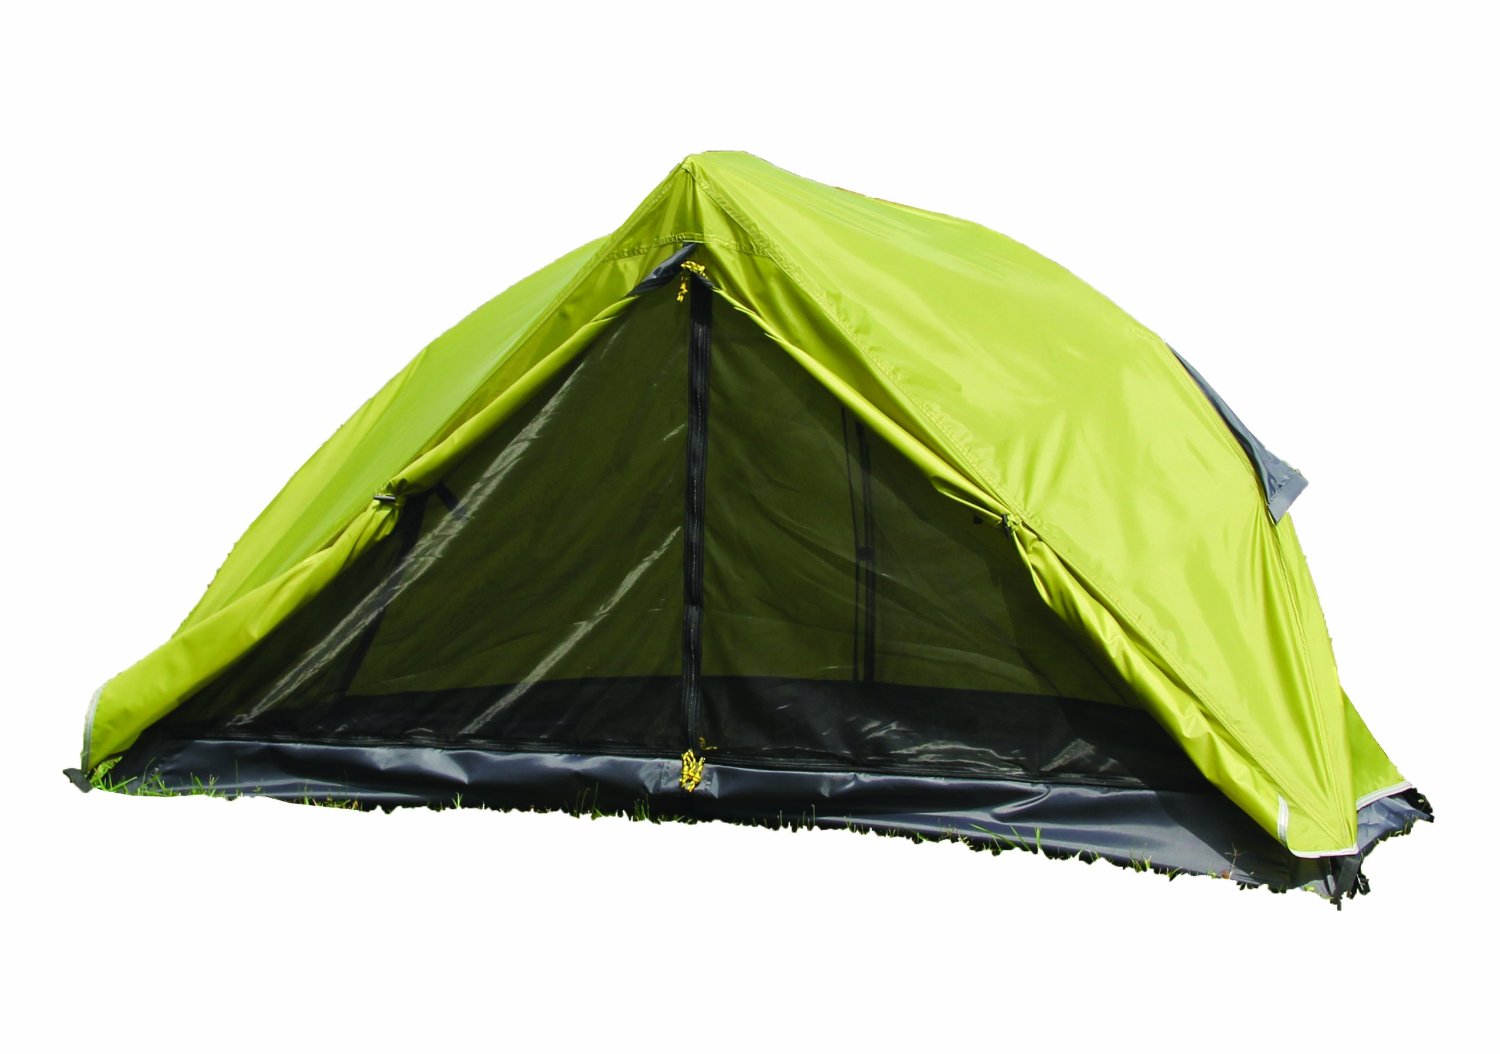 Top 10 Best Backpacking Tents